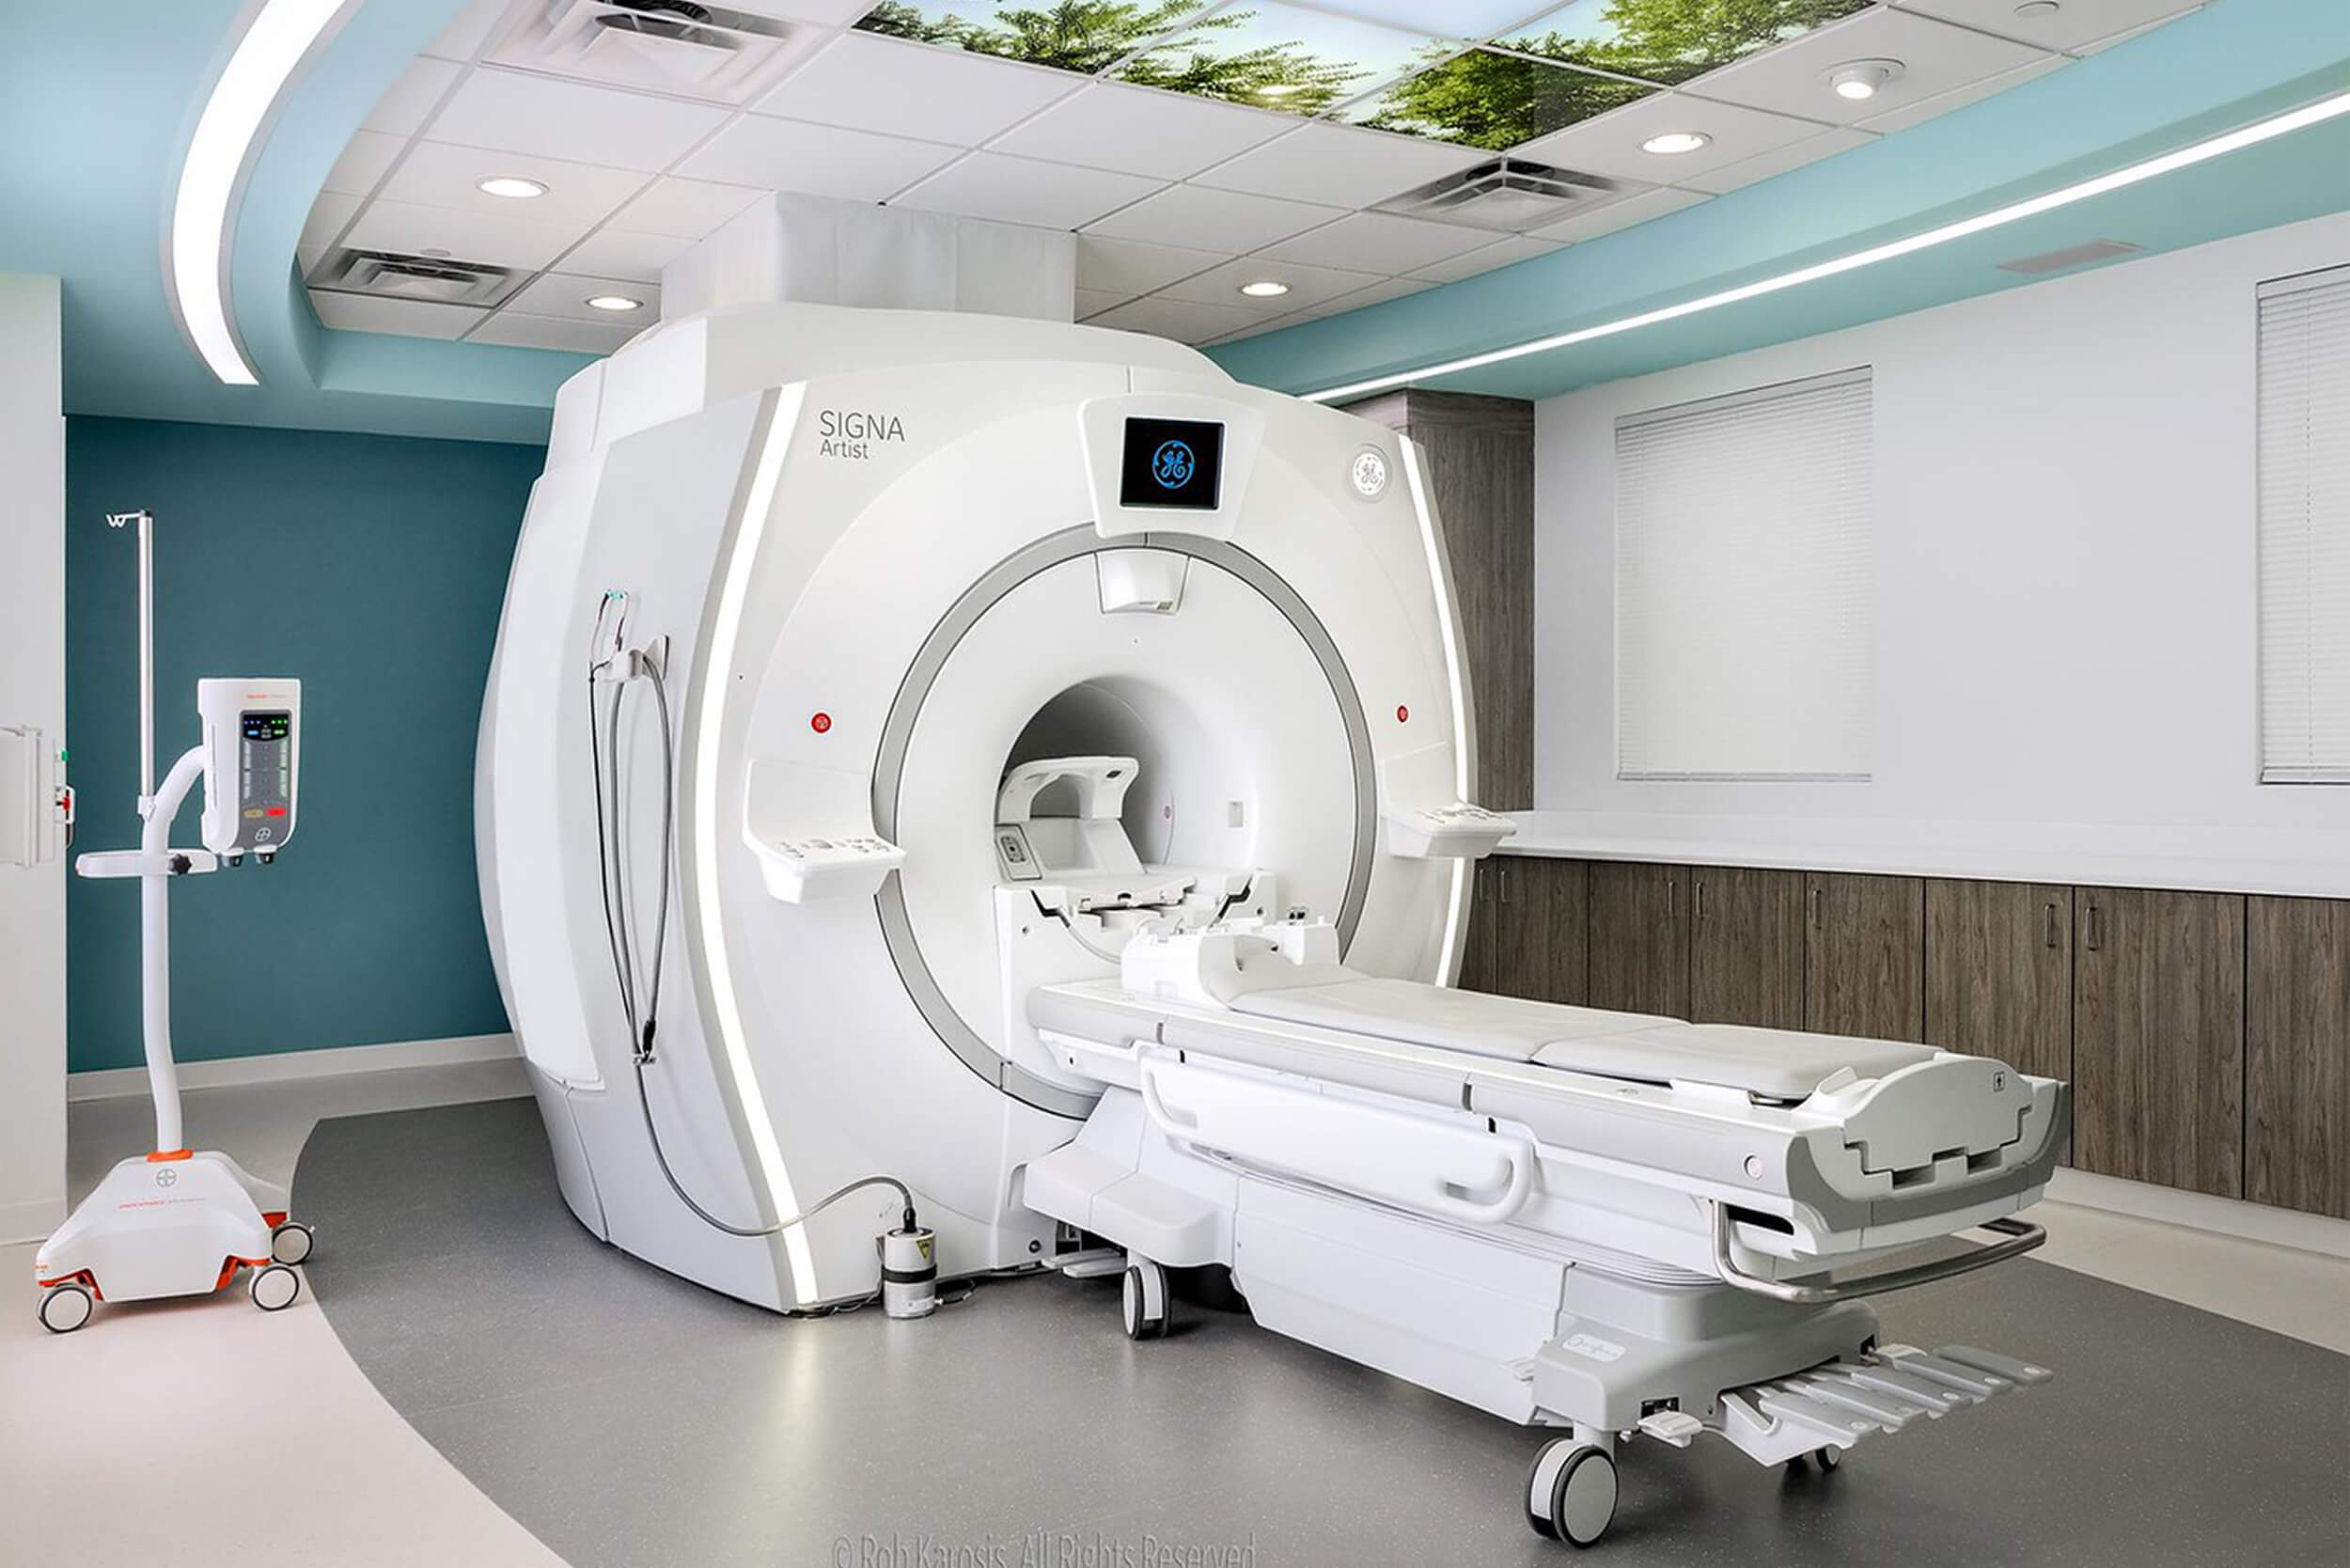 Interior view of an MRI imaging suite at a hospital. The room features medical equipment and a white MRI machine. The walls of the room are a light turquoise color.